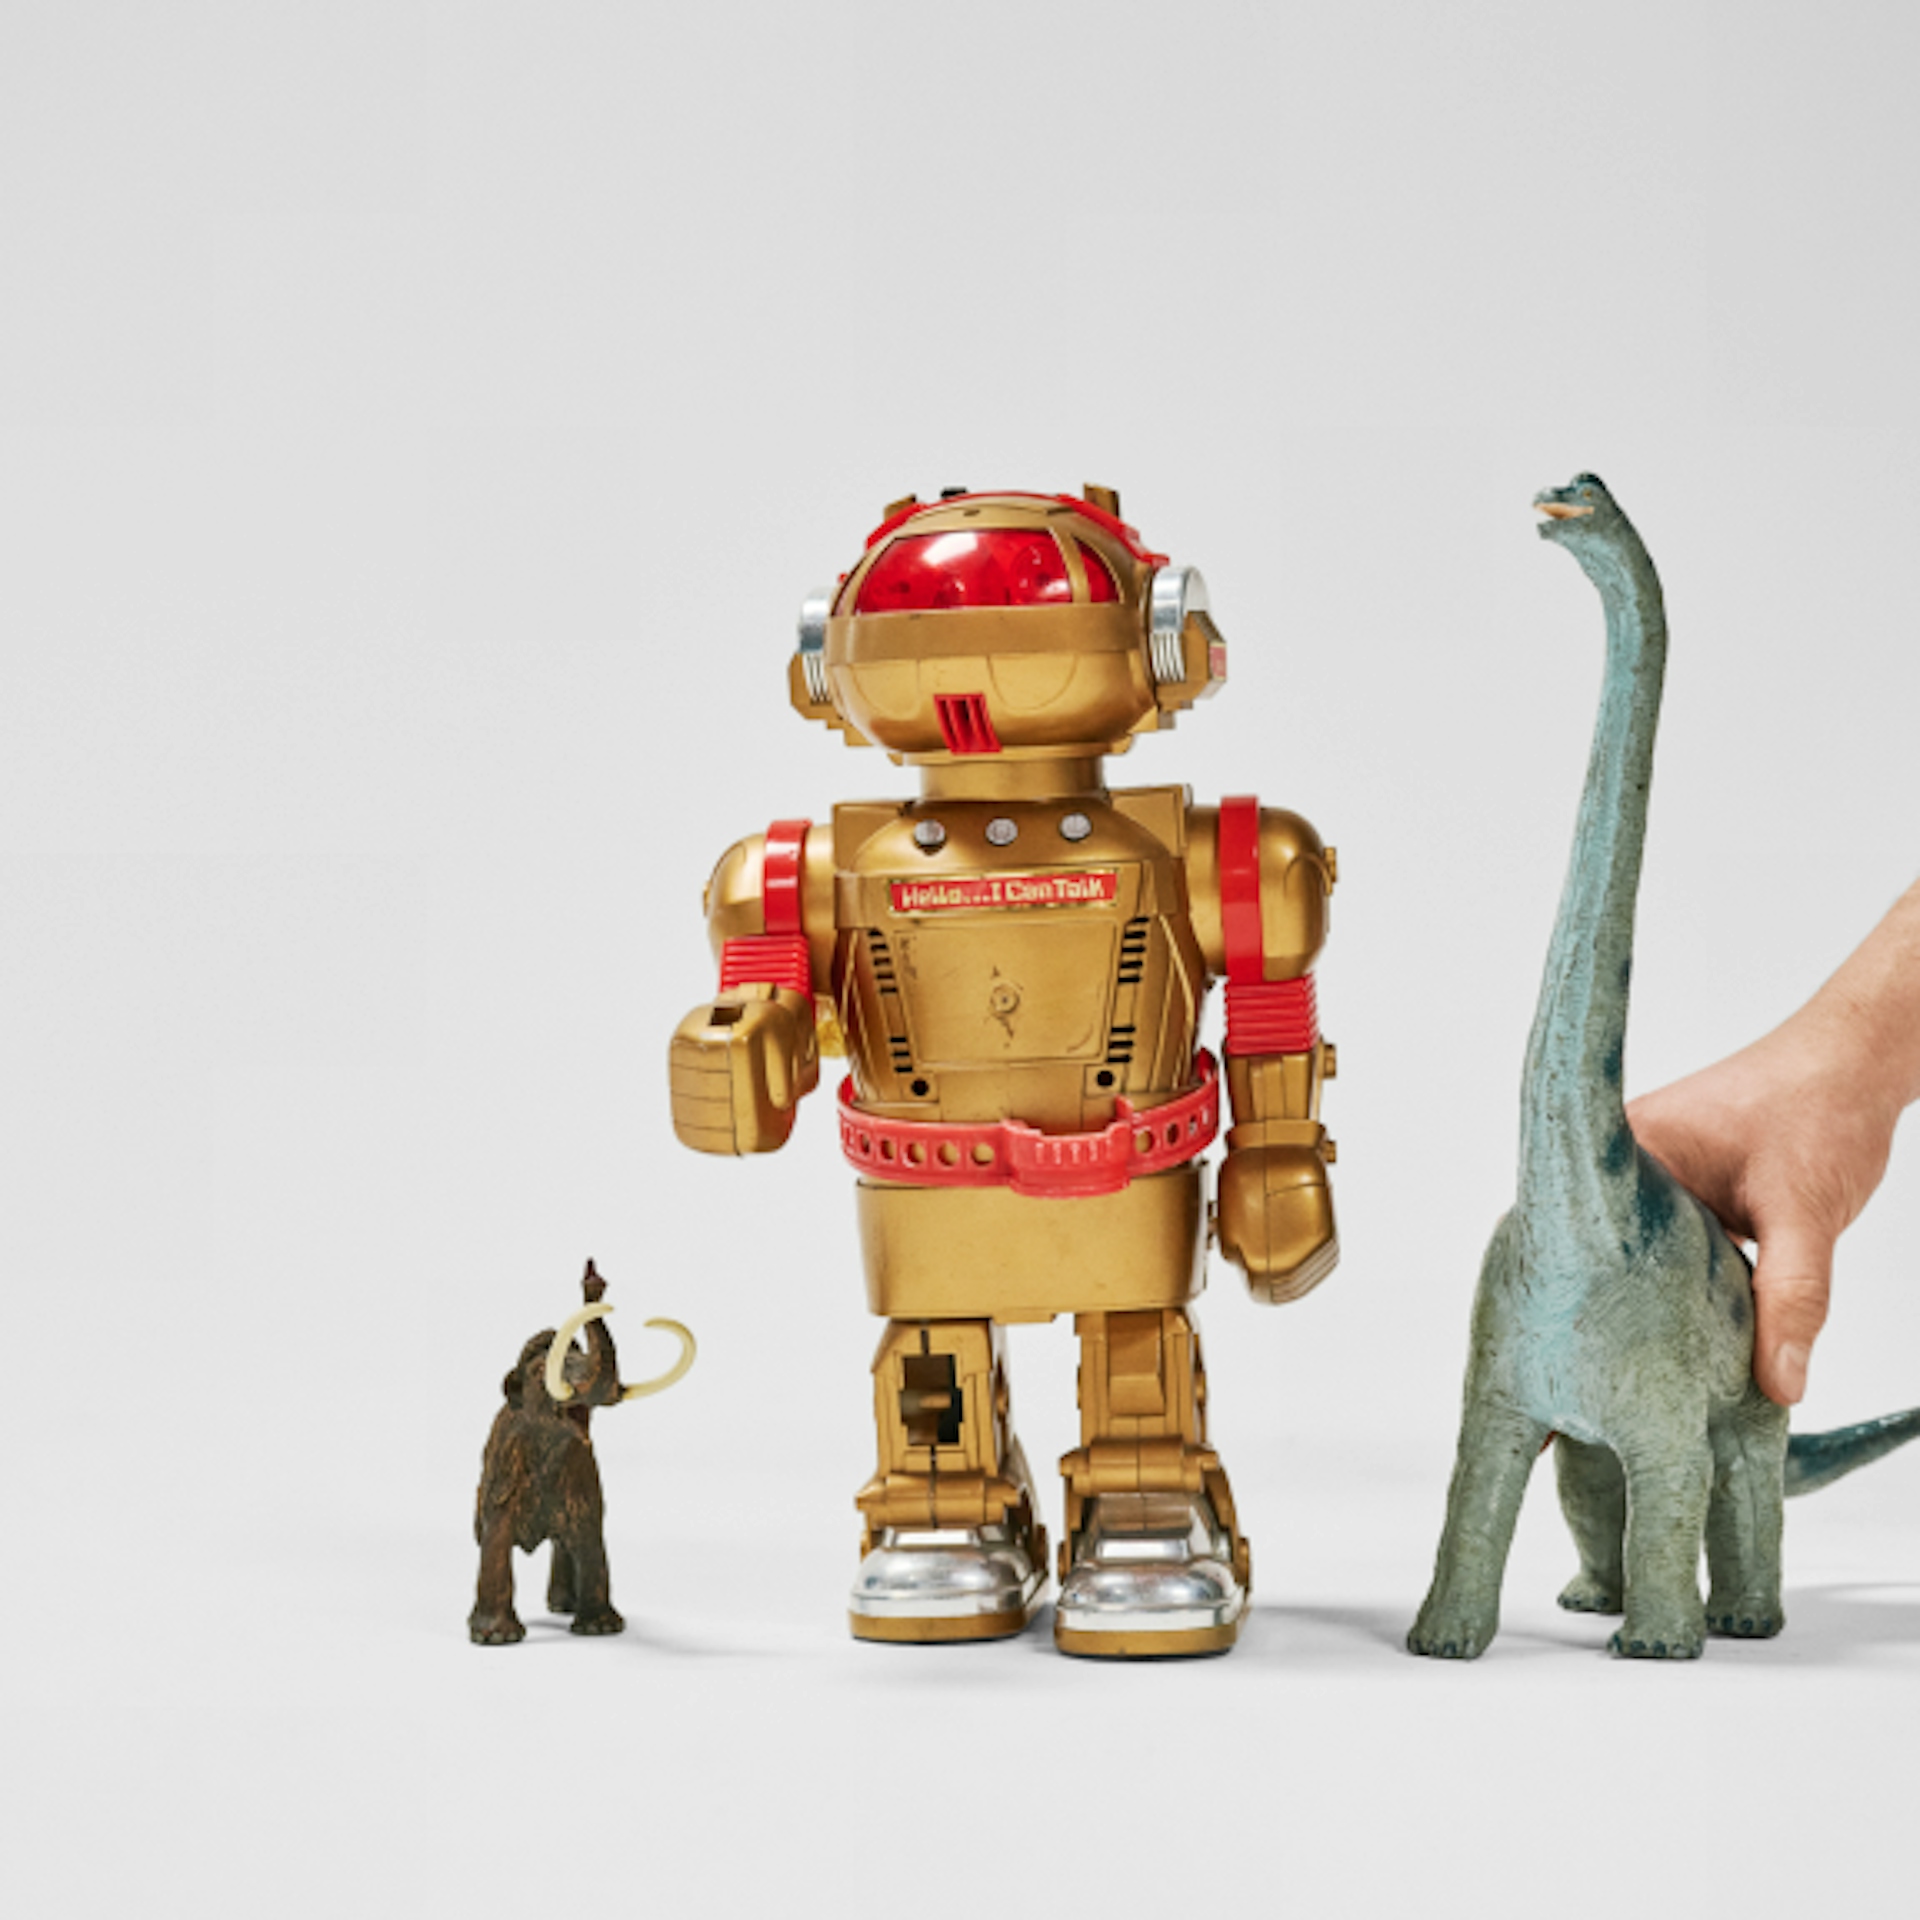 The image shows three toys: a small mammoth figure, a gold robot with red accents, and a large dinosaur figure. A hand is seen holding the dinosaur.